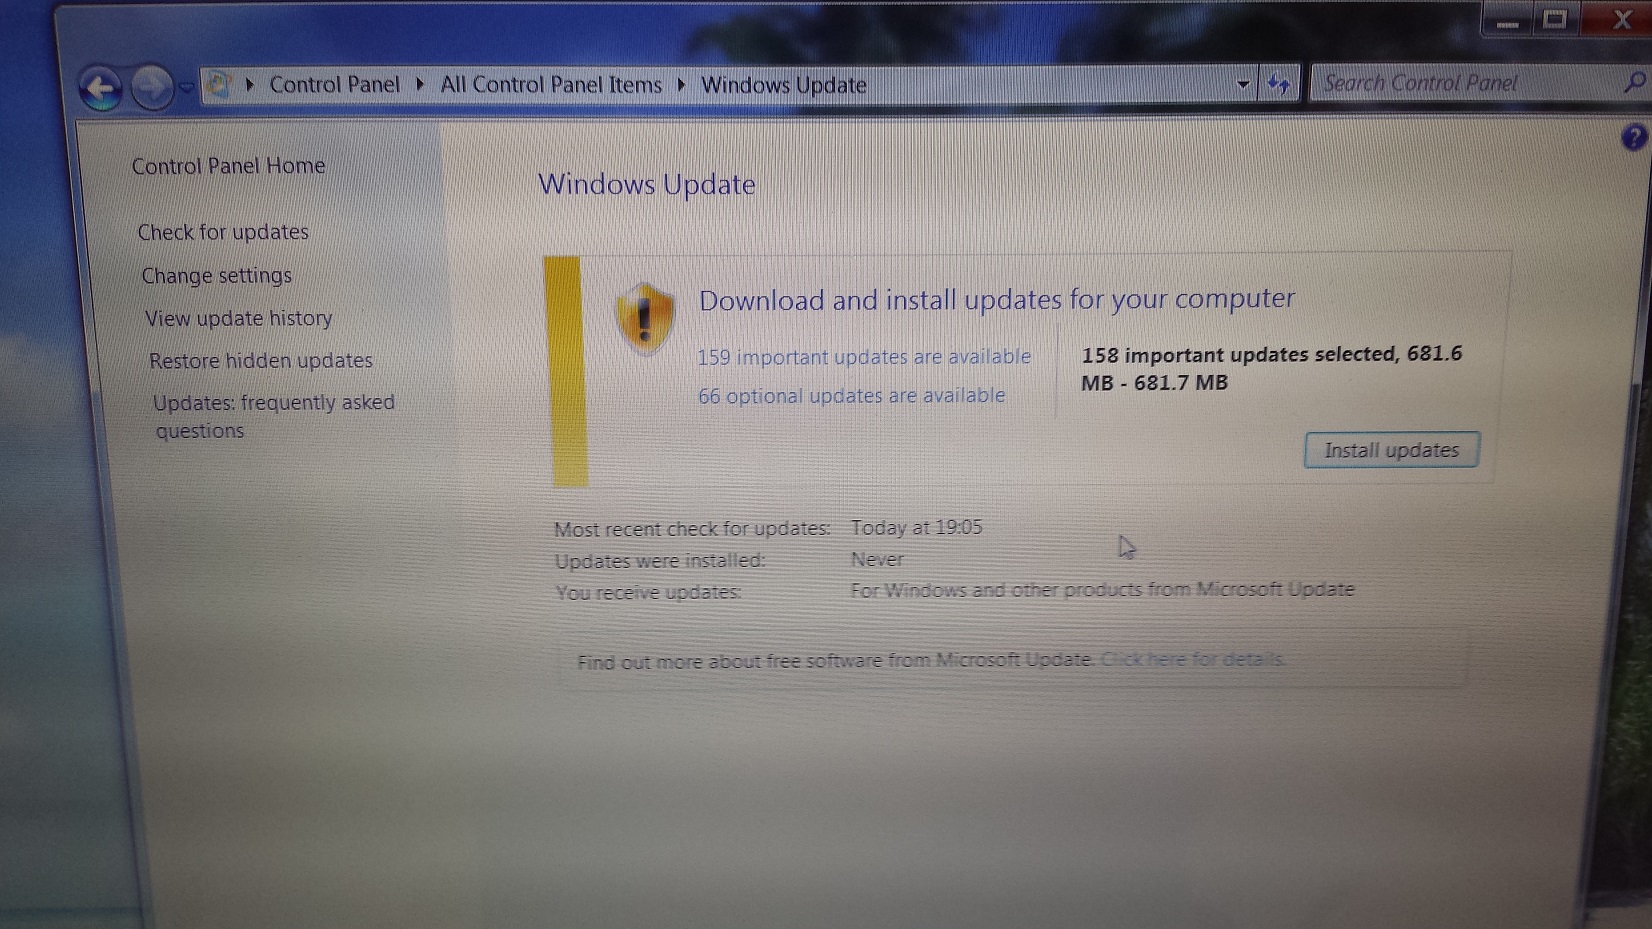 What happens when Windows 10 ends service for an update? 20160416_190650-jpg.jpg